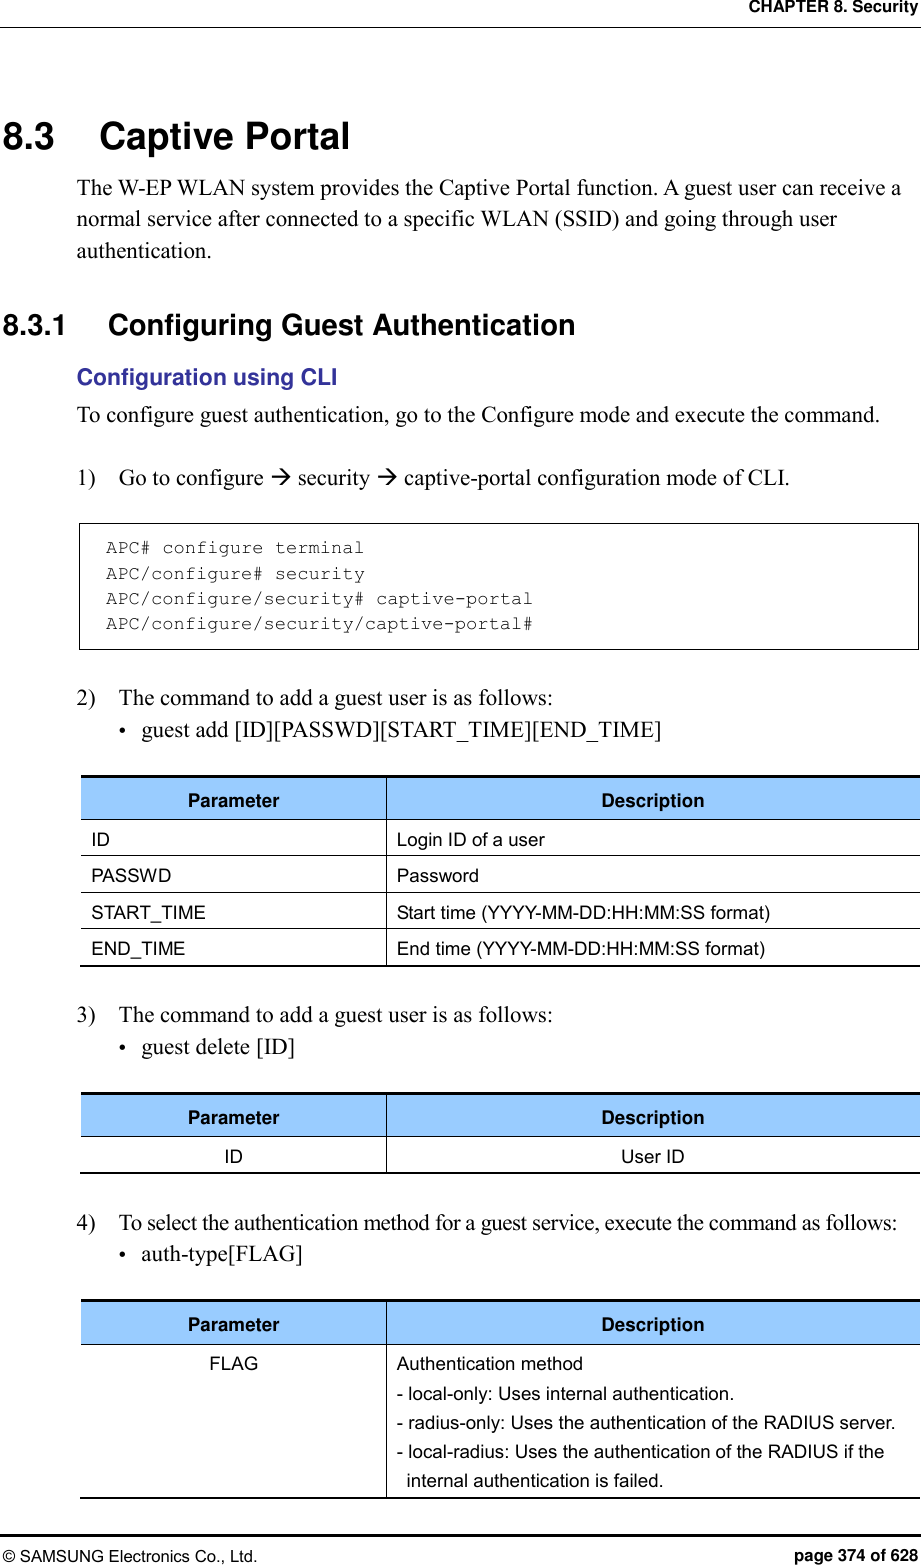 CHAPTER 8. Security © SAMSUNG Electronics Co., Ltd.  page 374 of 628 8.3  Captive Portal The W-EP WLAN system provides the Captive Portal function. A guest user can receive a normal service after connected to a specific WLAN (SSID) and going through user authentication.  8.3.1  Configuring Guest Authentication Configuration using CLI To configure guest authentication, go to the Configure mode and execute the command.  1)    Go to configure  security  captive-portal configuration mode of CLI.  APC# configure terminal APC/configure# security APC/configure/security# captive-portal APC/configure/security/captive-portal#  2)    The command to add a guest user is as follows:  guest add [ID][PASSWD][START_TIME][END_TIME]  Parameter Description ID Login ID of a user PASSWD Password START_TIME Start time (YYYY-MM-DD:HH:MM:SS format) END_TIME End time (YYYY-MM-DD:HH:MM:SS format)  3)    The command to add a guest user is as follows:  guest delete [ID]  Parameter Description ID User ID  4)    To select the authentication method for a guest service, execute the command as follows:  auth-type[FLAG]  Parameter Description FLAG Authentication method - local-only: Uses internal authentication. - radius-only: Uses the authentication of the RADIUS server. - local-radius: Uses the authentication of the RADIUS if the internal authentication is failed. 